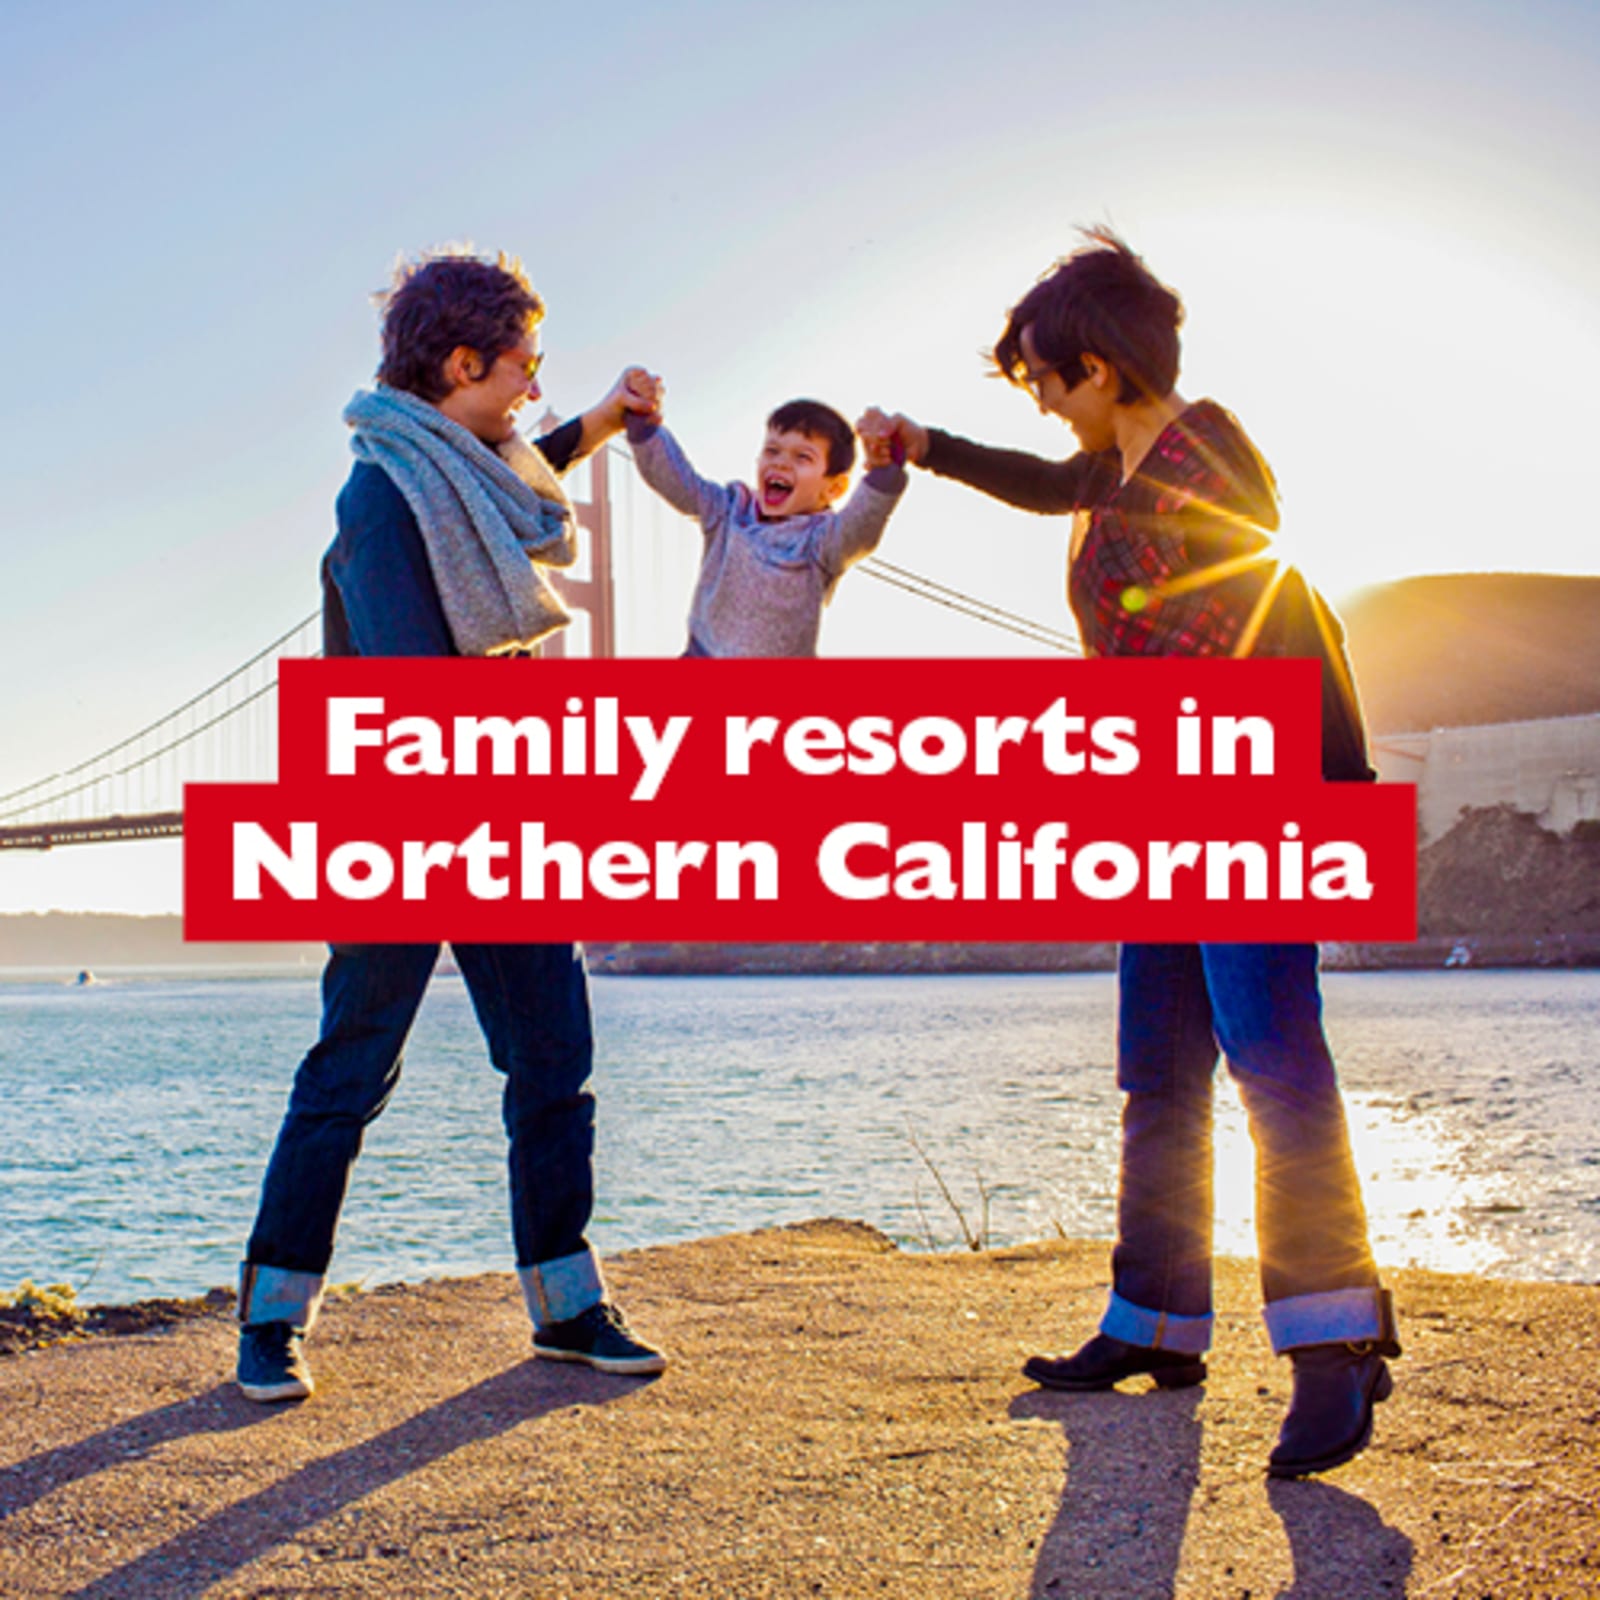 Family resorts in Northern California